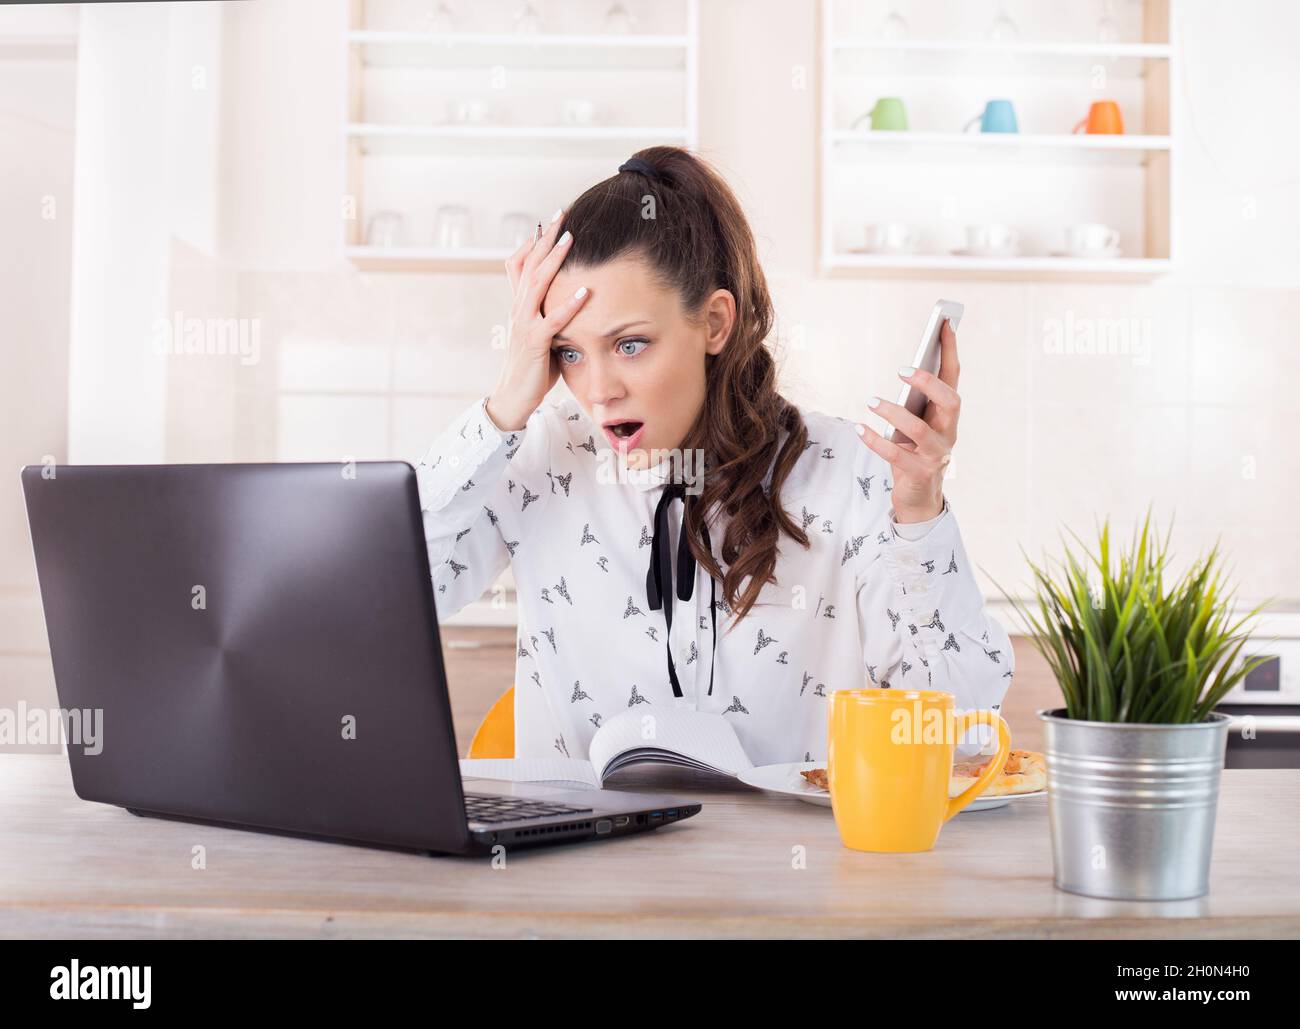 Shocked young woman holding mobile phone and looking at laptop. Busy girl working from home Stock Photo